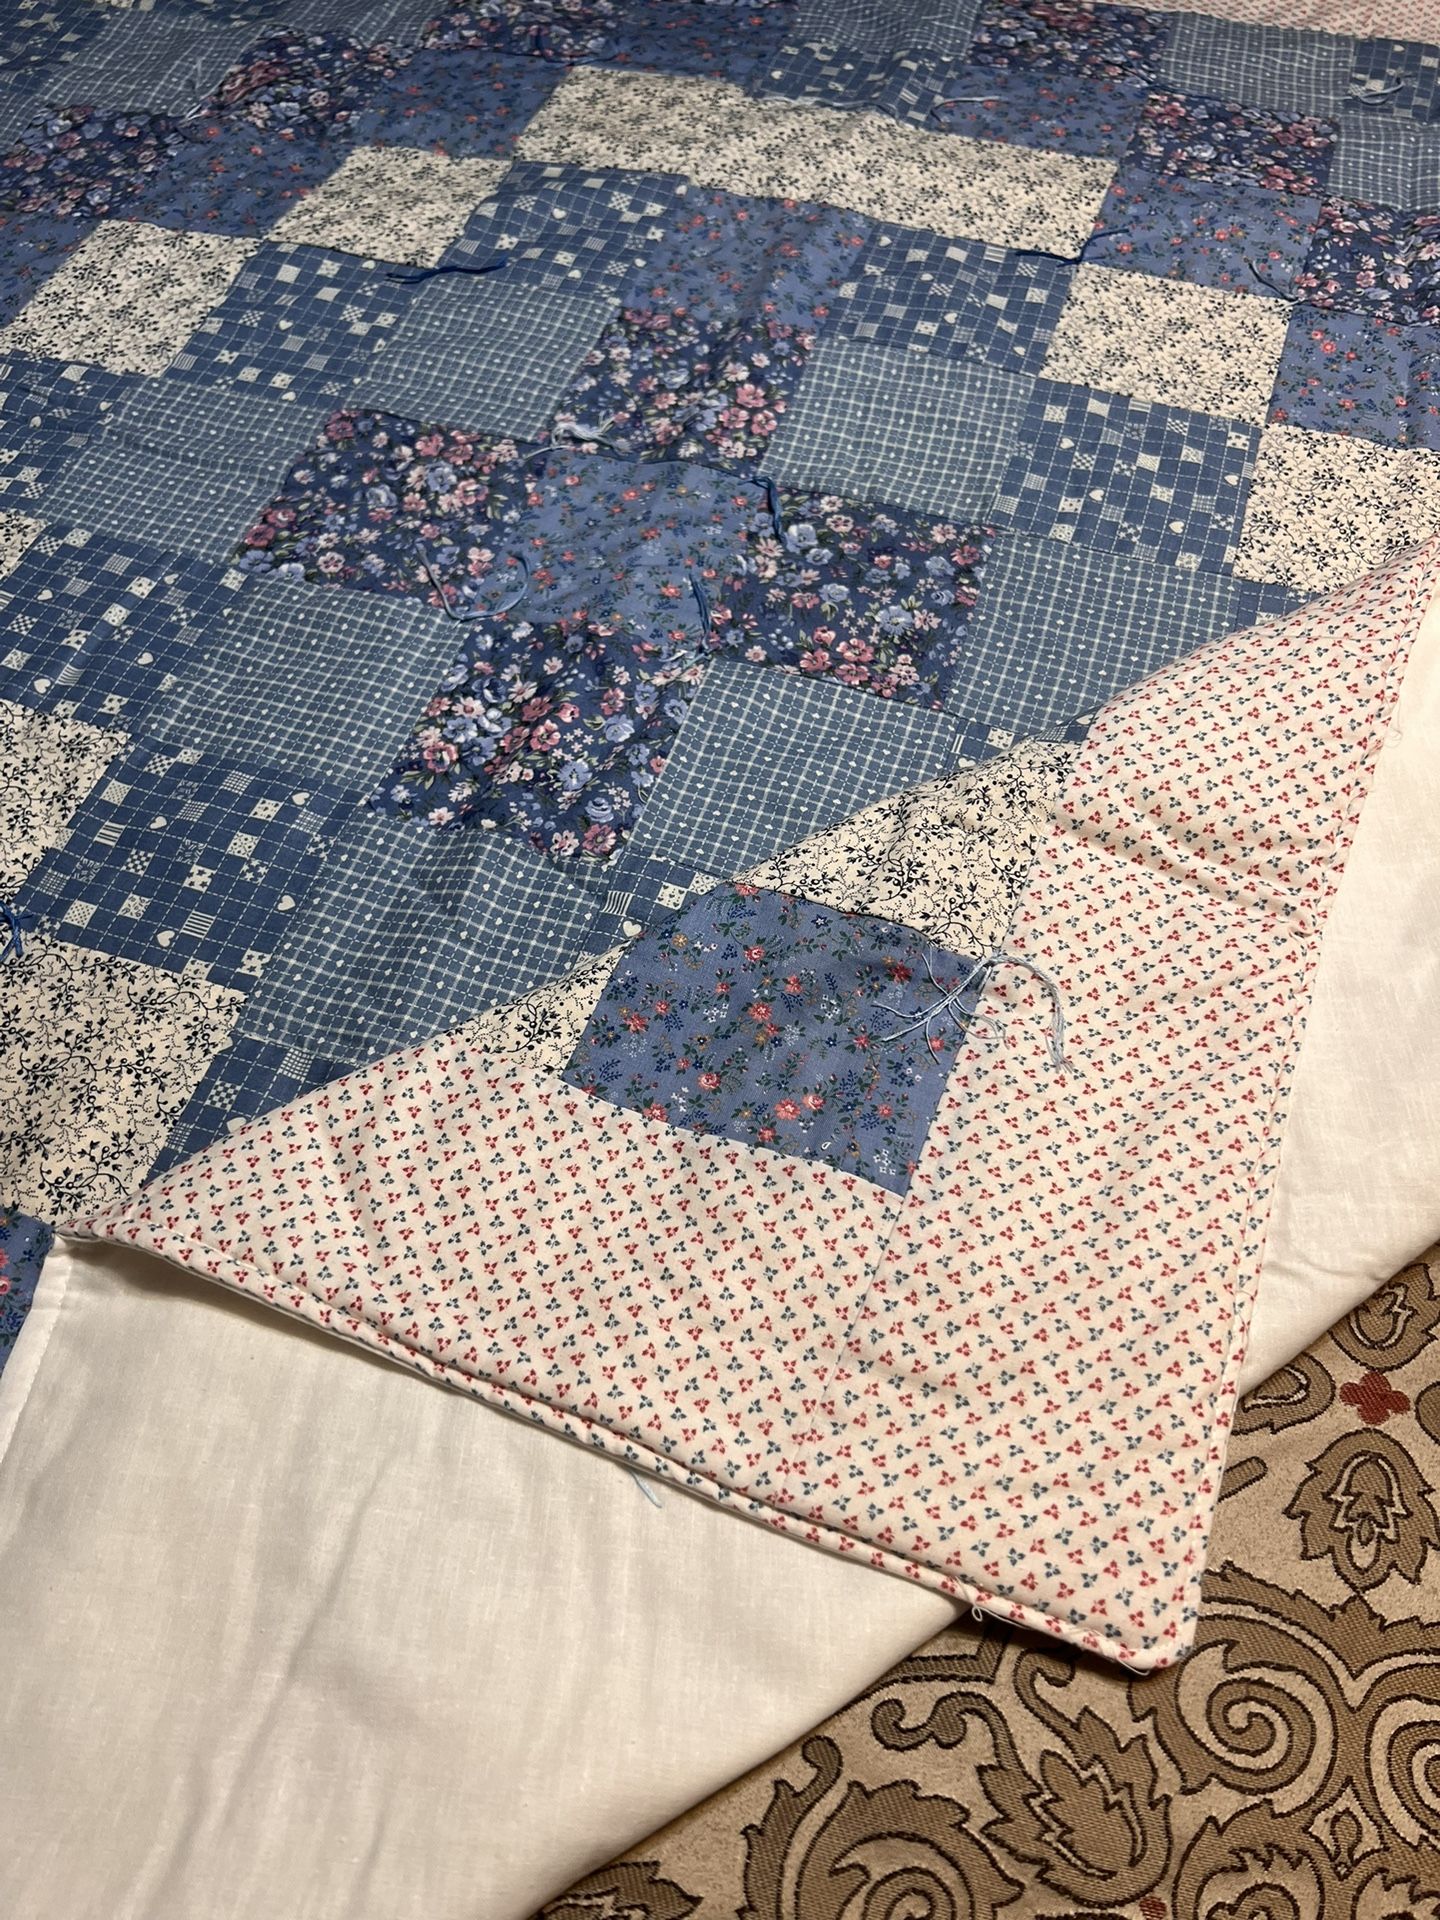 Baby Quilt   48 X 50 inches   Good Condition   